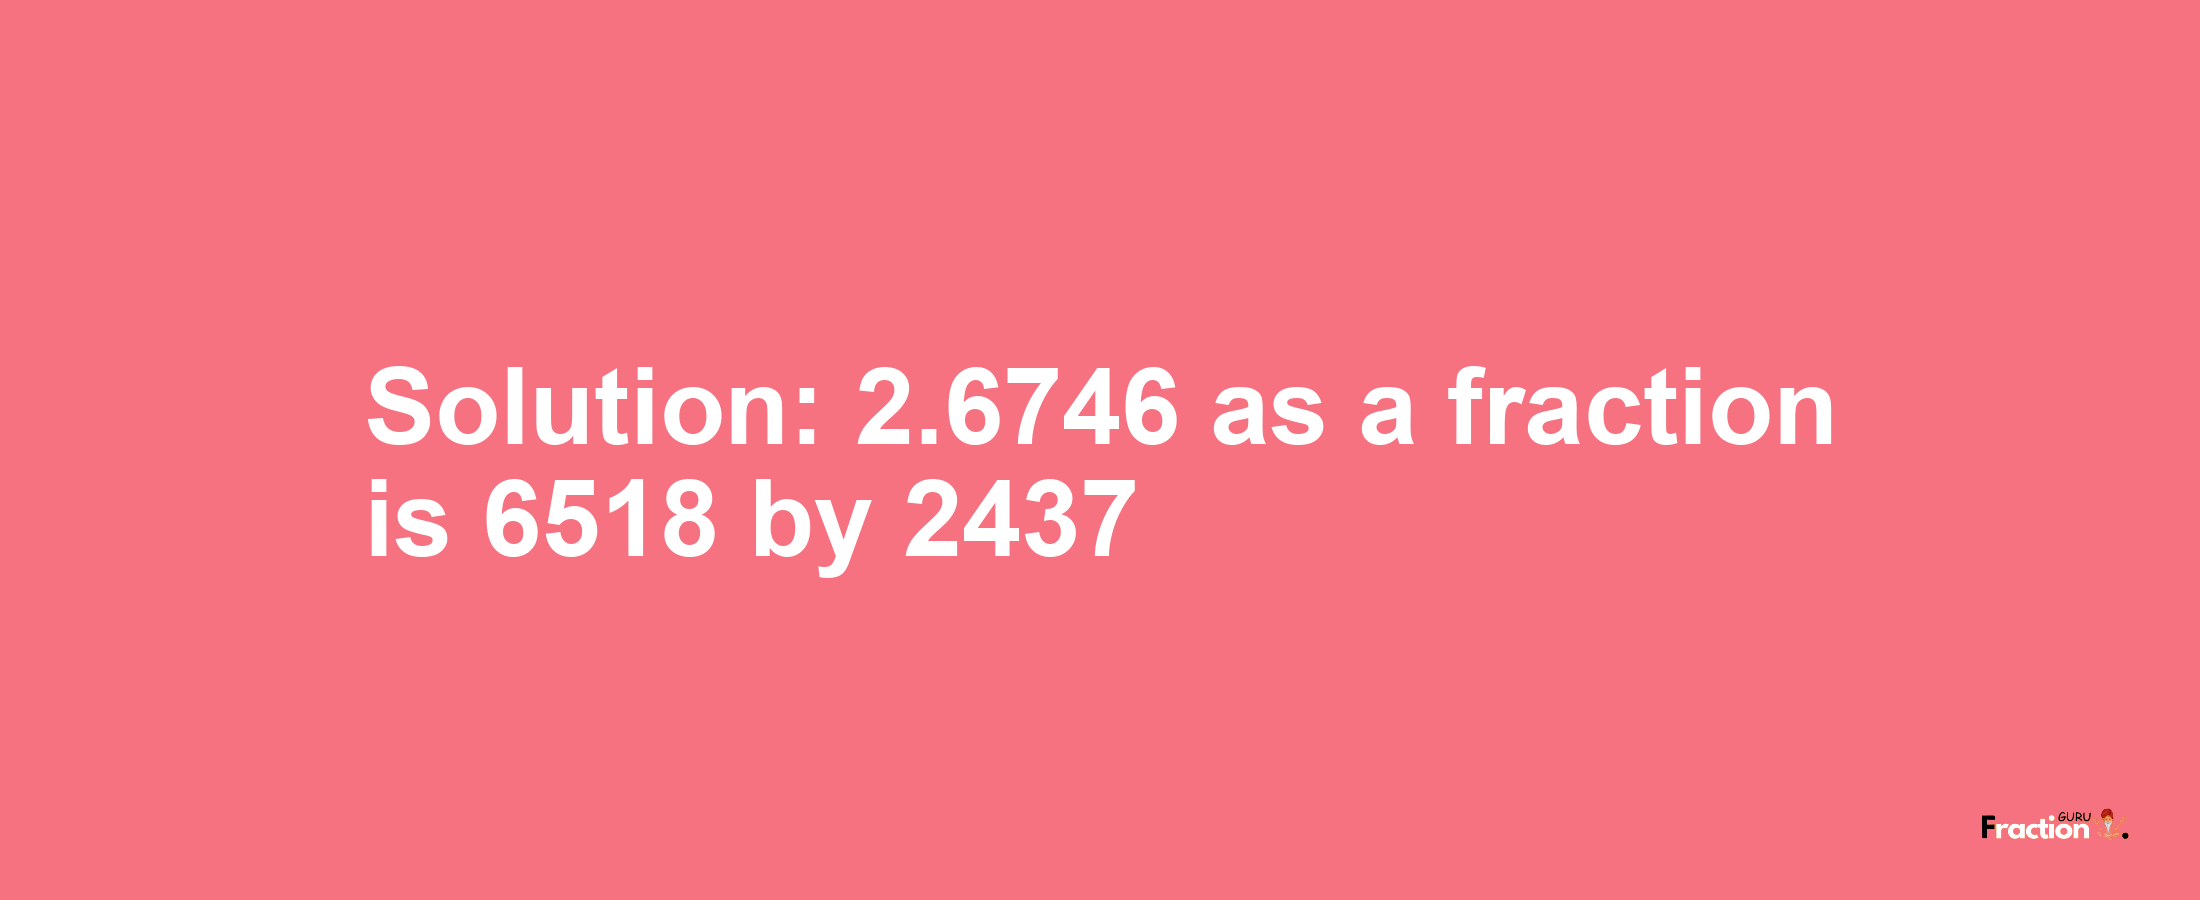 Solution:2.6746 as a fraction is 6518/2437